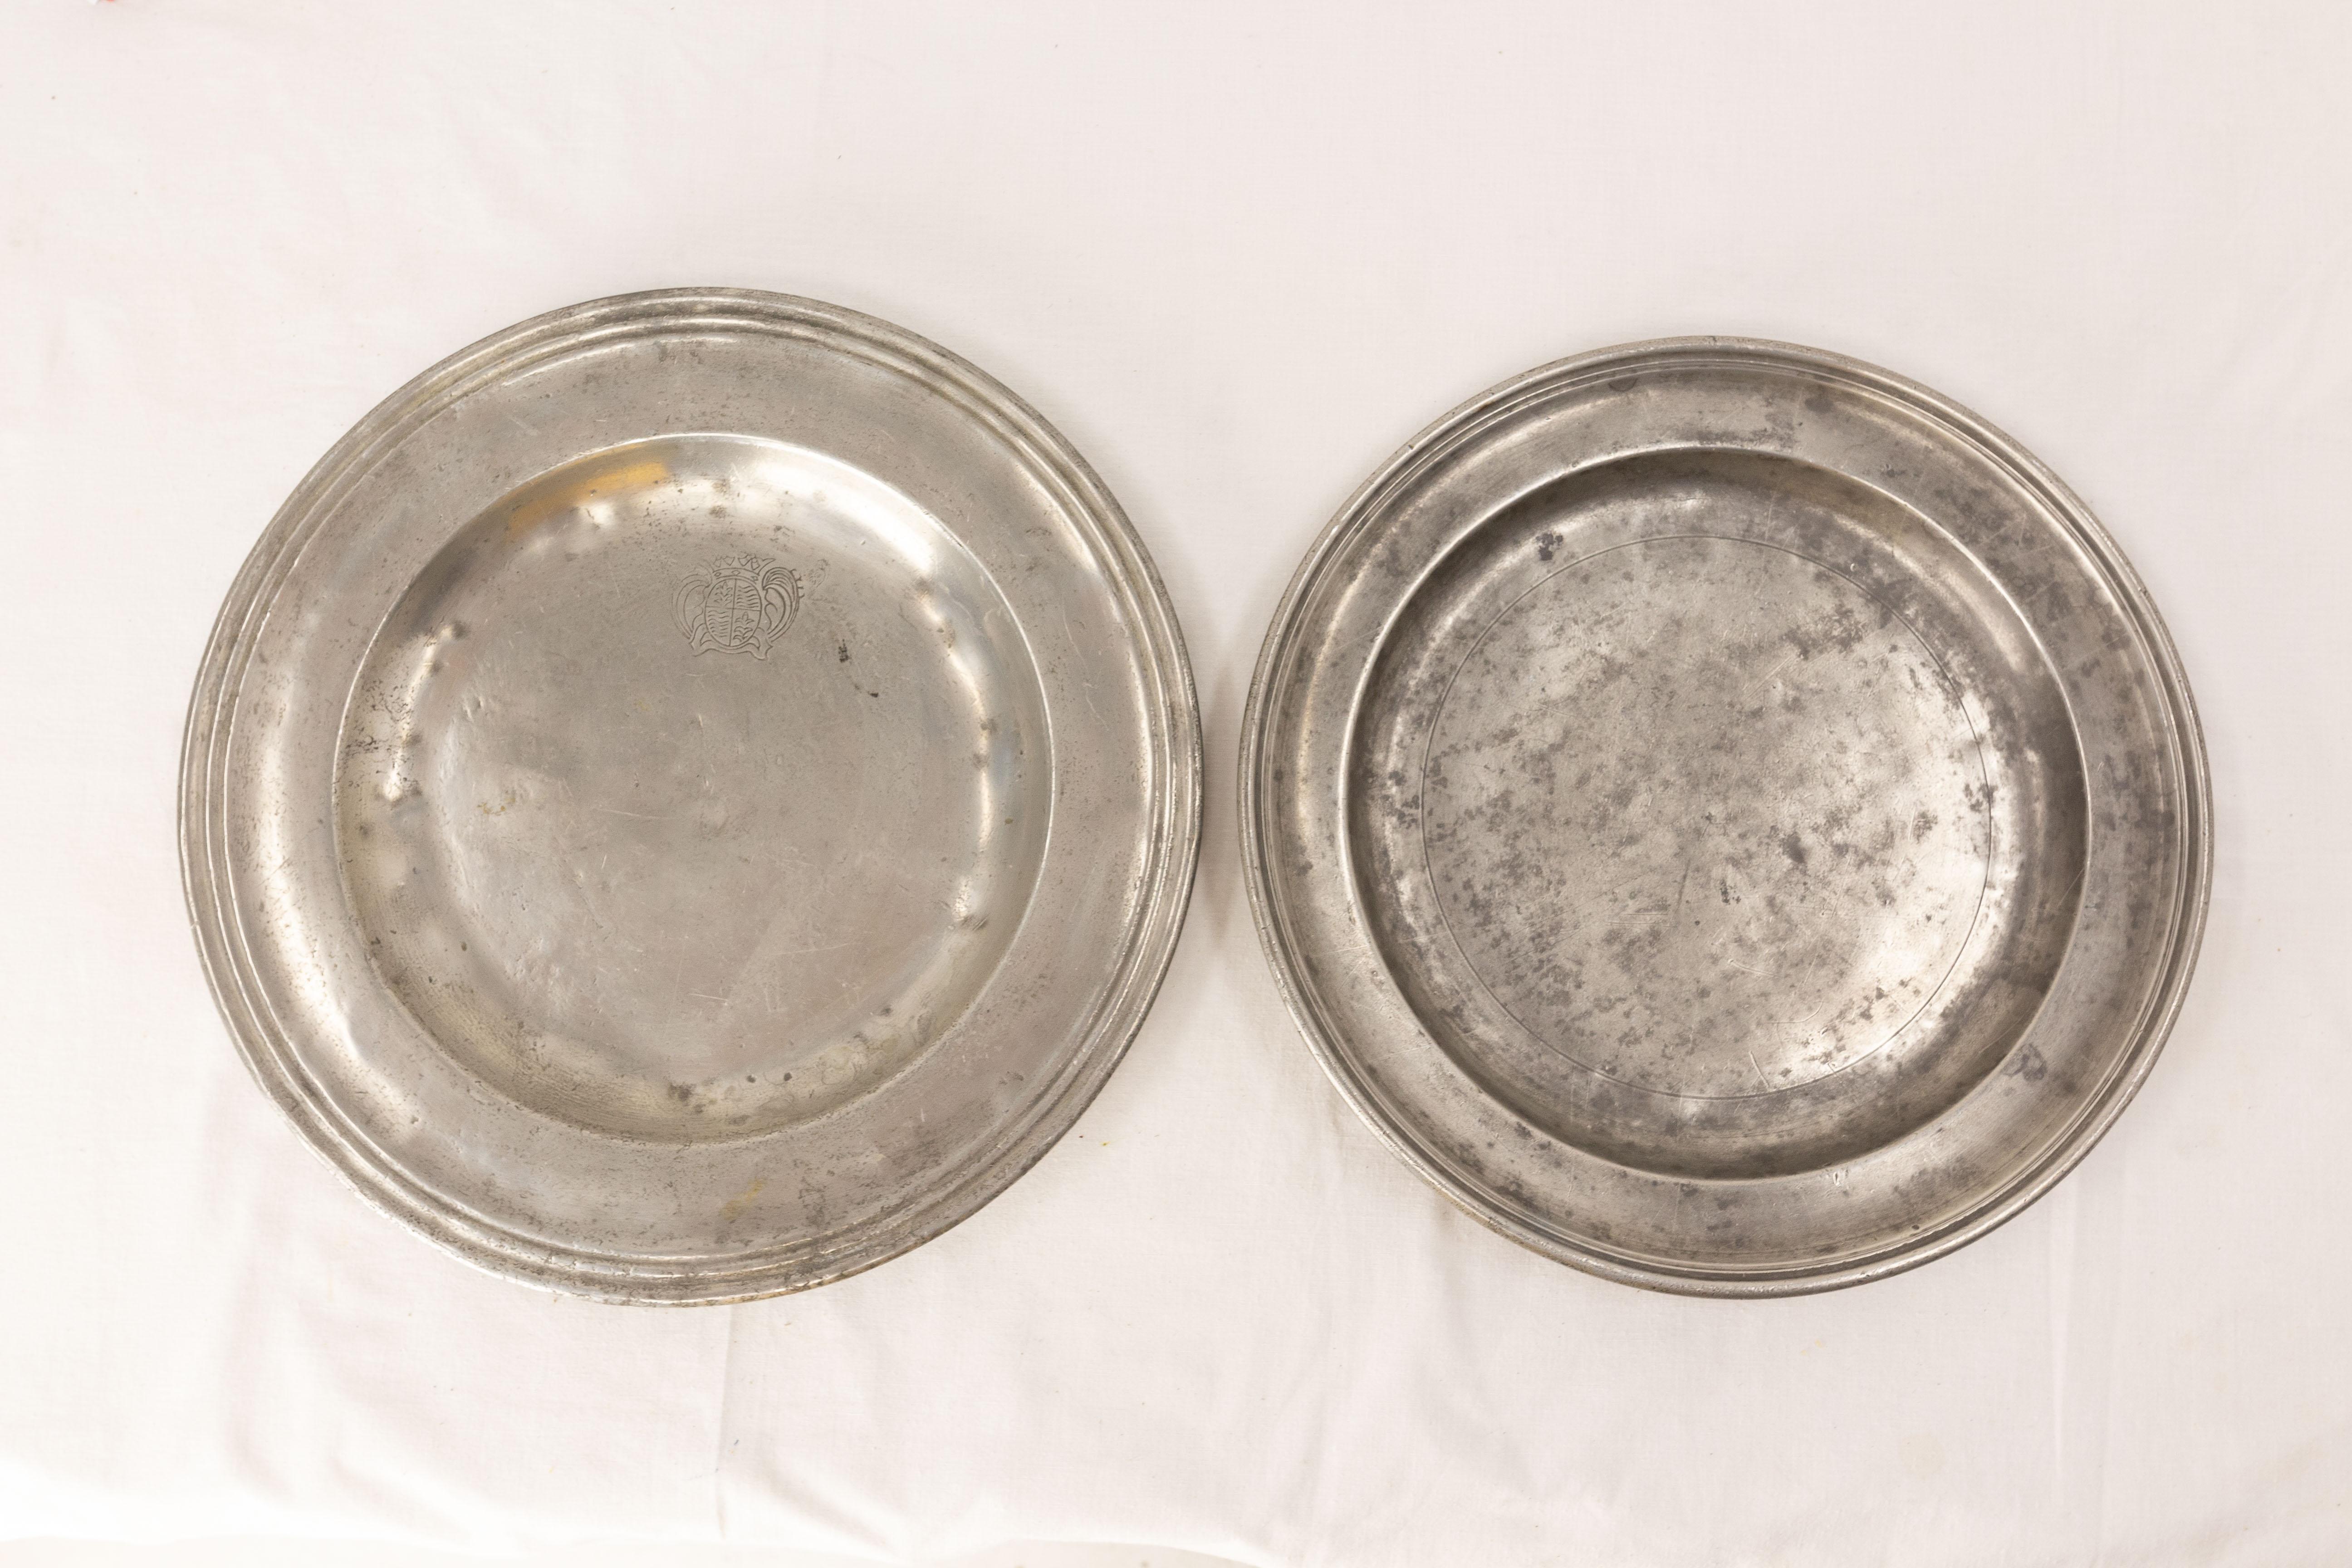 Pair of tin platters
19th century, French
The biggest one has a crest mark on the back of the dish.
Measures
Big platter diameter: 12.99 in., height 1.06 in.
Little platter diameter: 12.20 in., height 1.97 in.
  